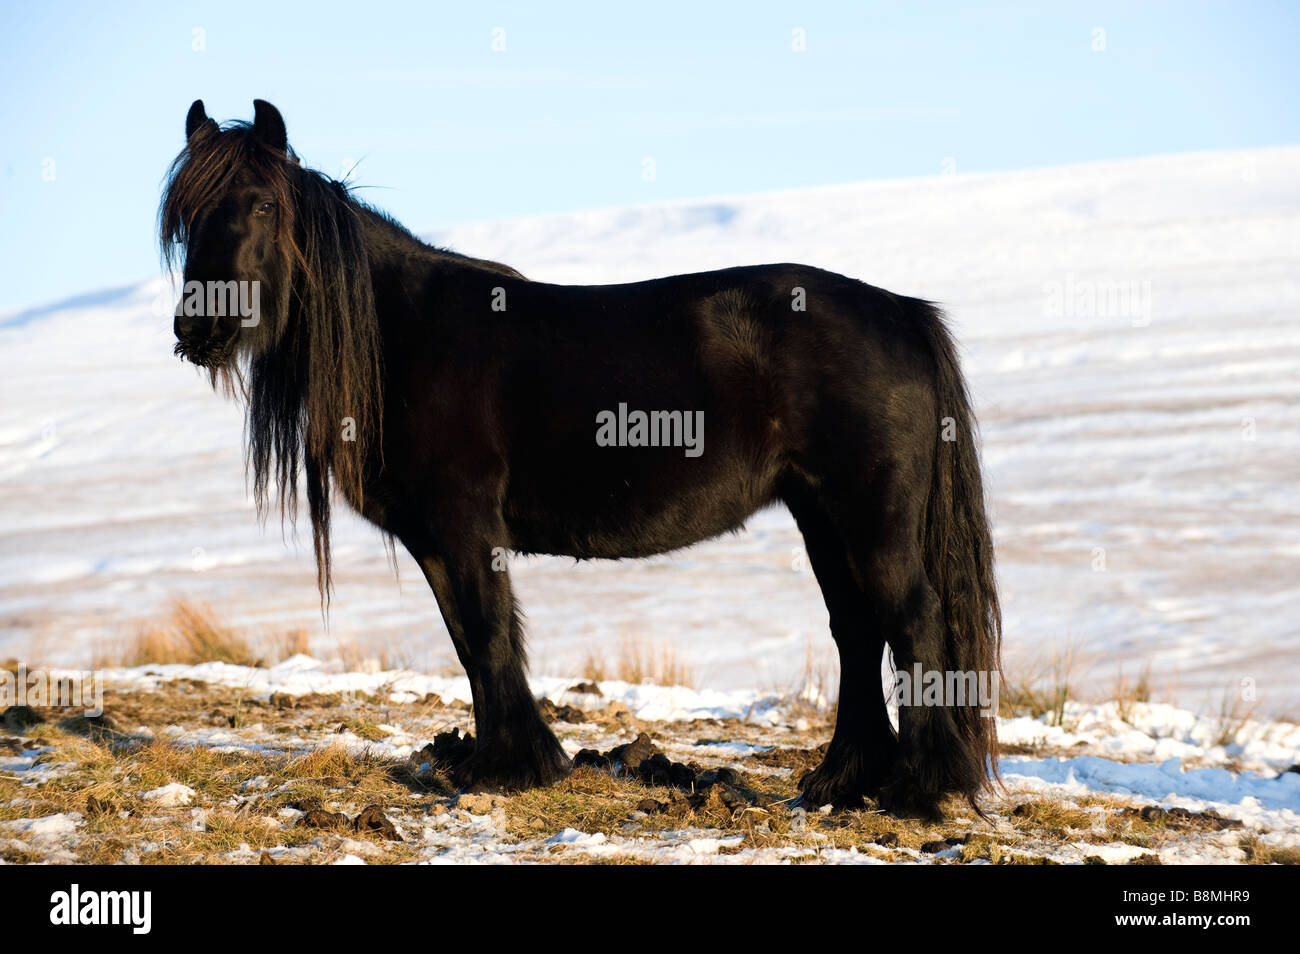 Fell pony grazing among snow on high moorland Wld Boar Fell in background Ravenstonedale Cumbria Stock Photo